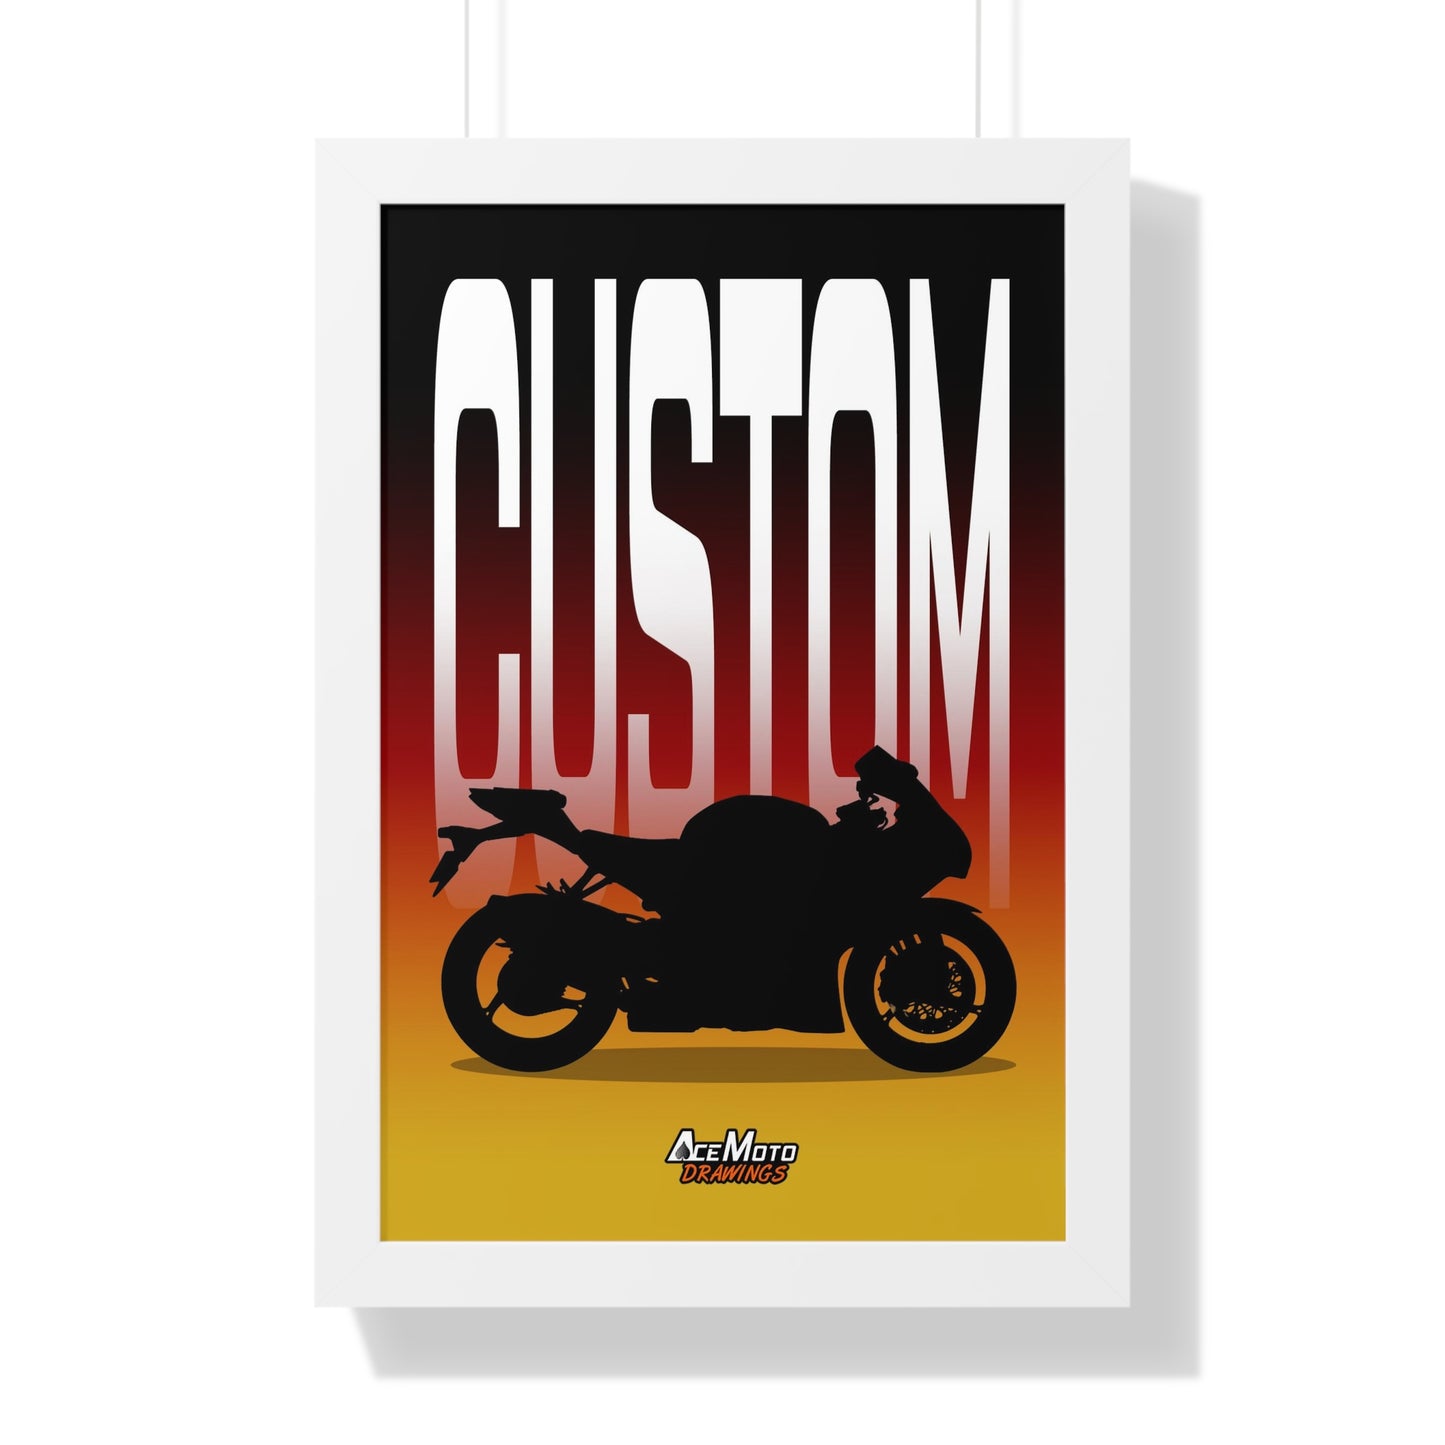 Draw My Motorcycle | Personalized Posters & Canvas | Motorcycle Poster, Bike Wall Art Decor - Gift for Riders